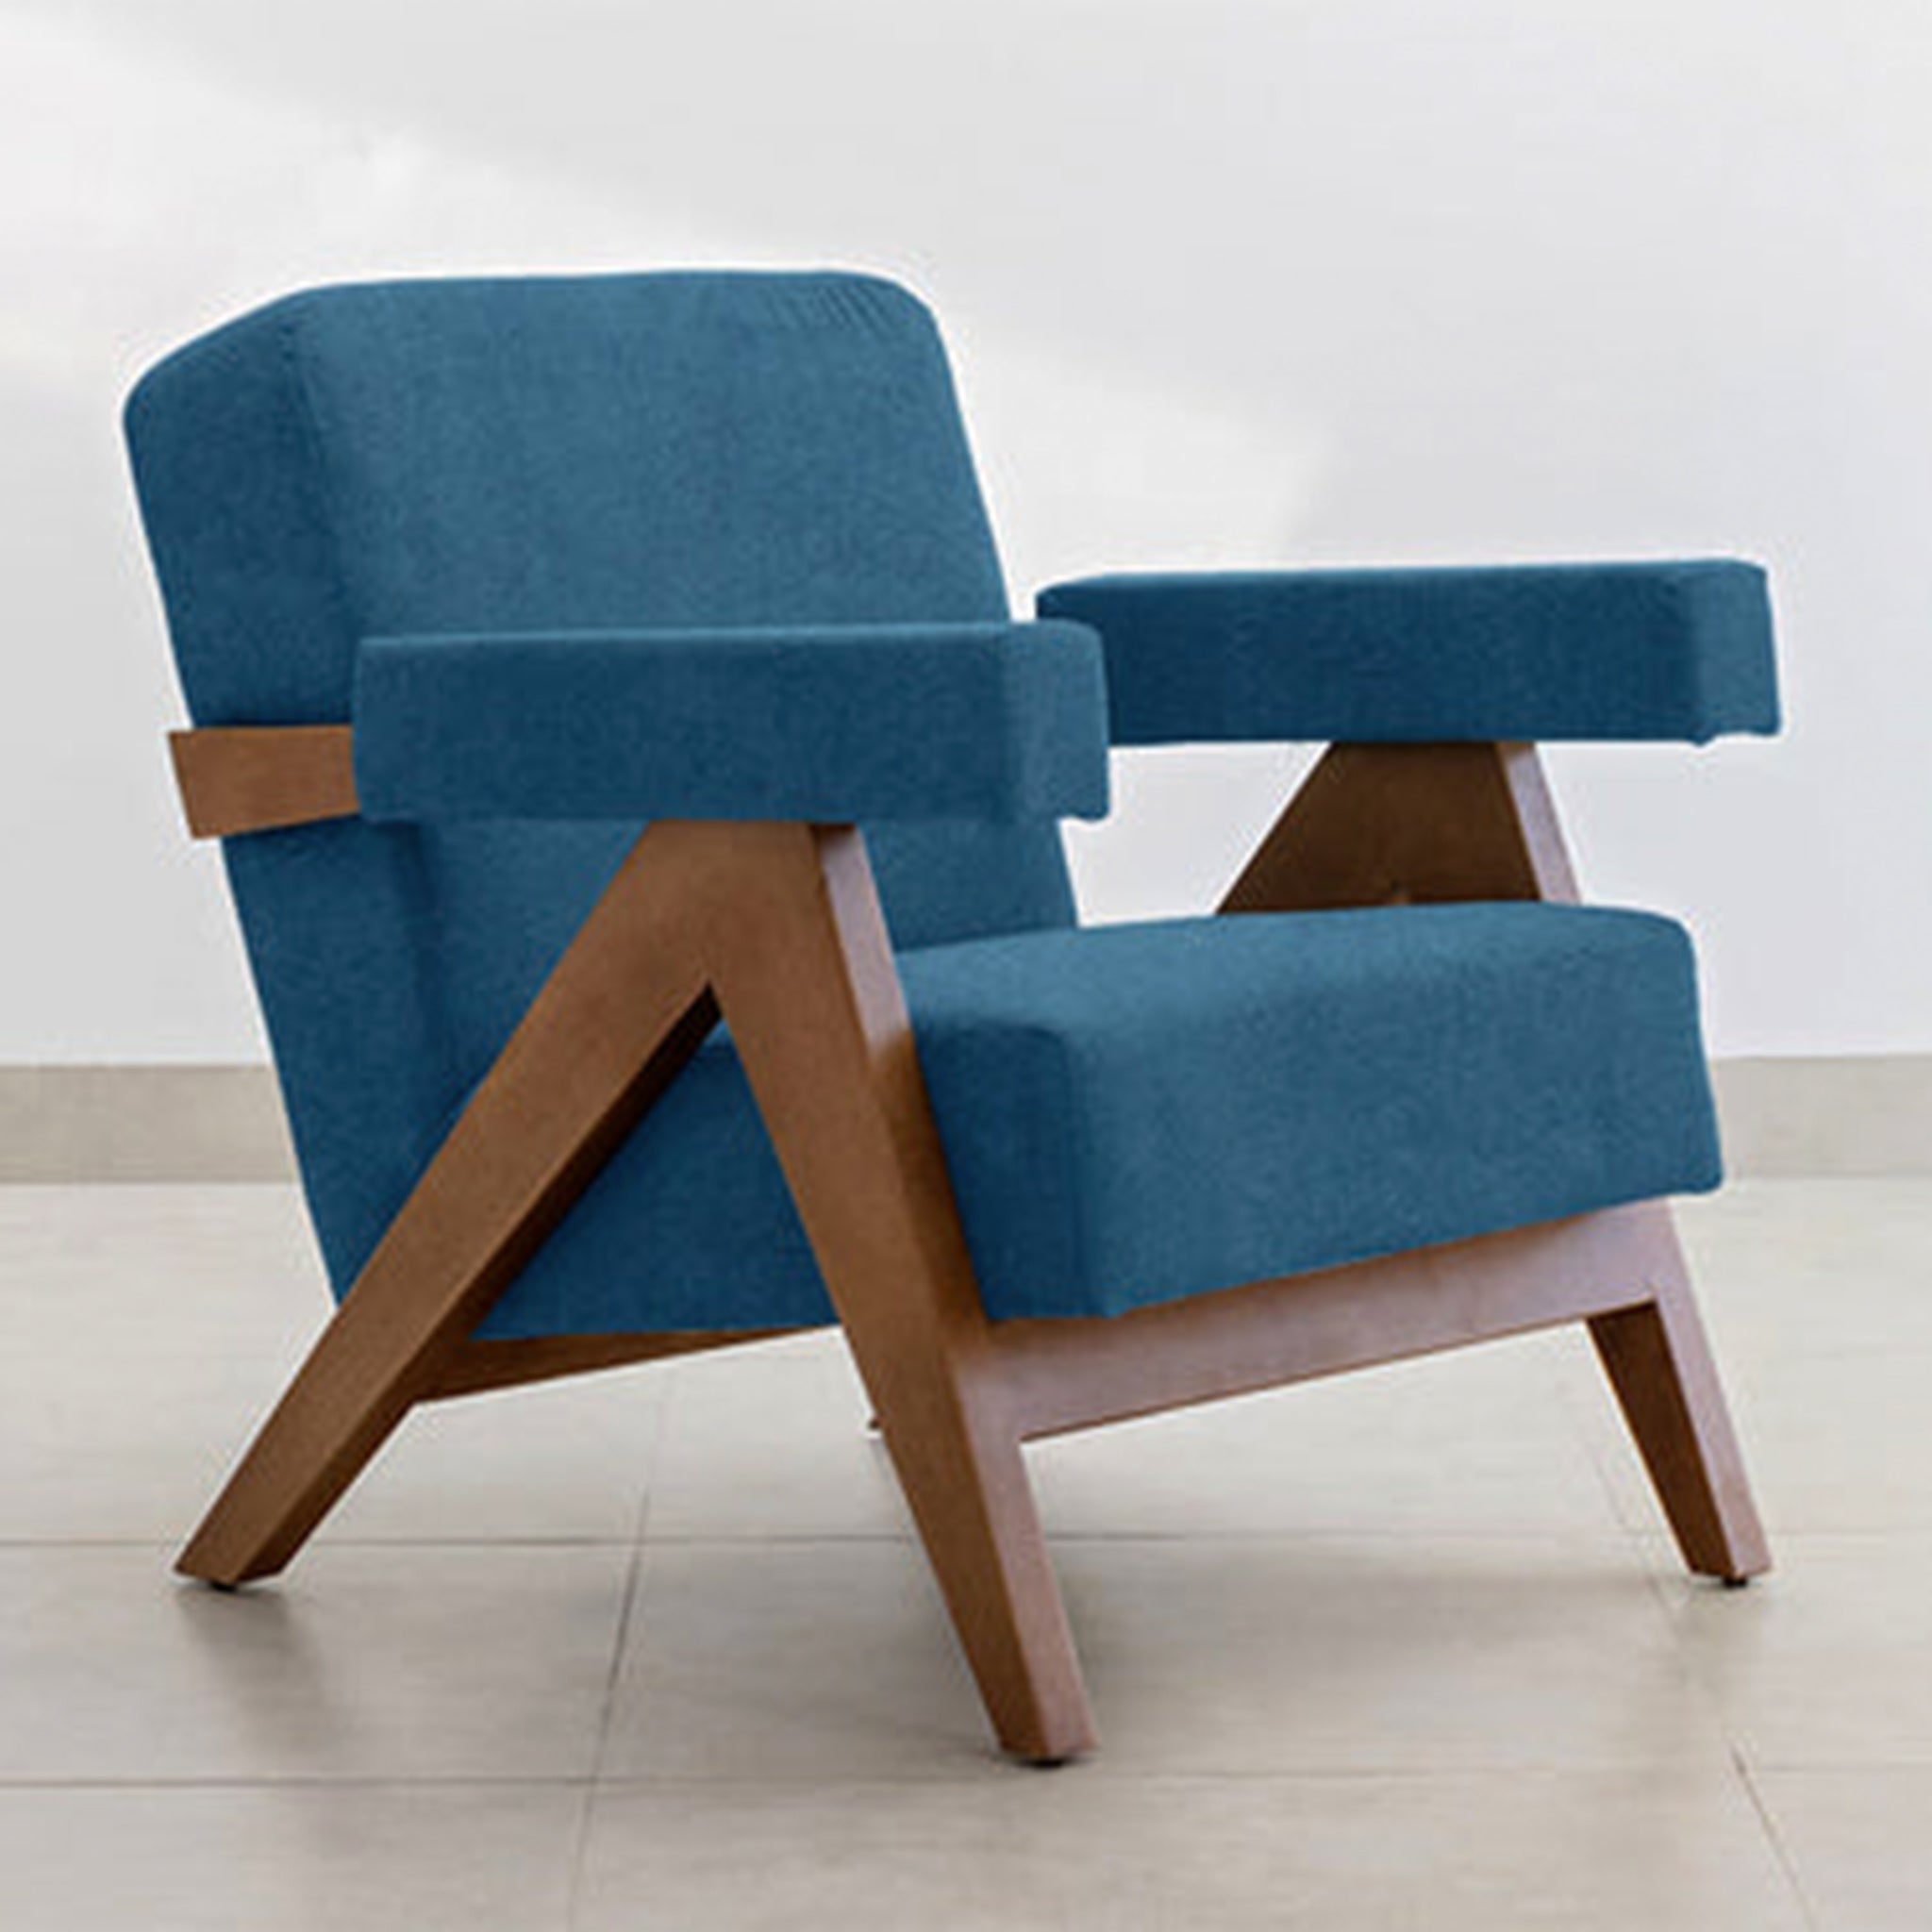 Teal and wood Pierre Accent Chair for a sophisticated look.